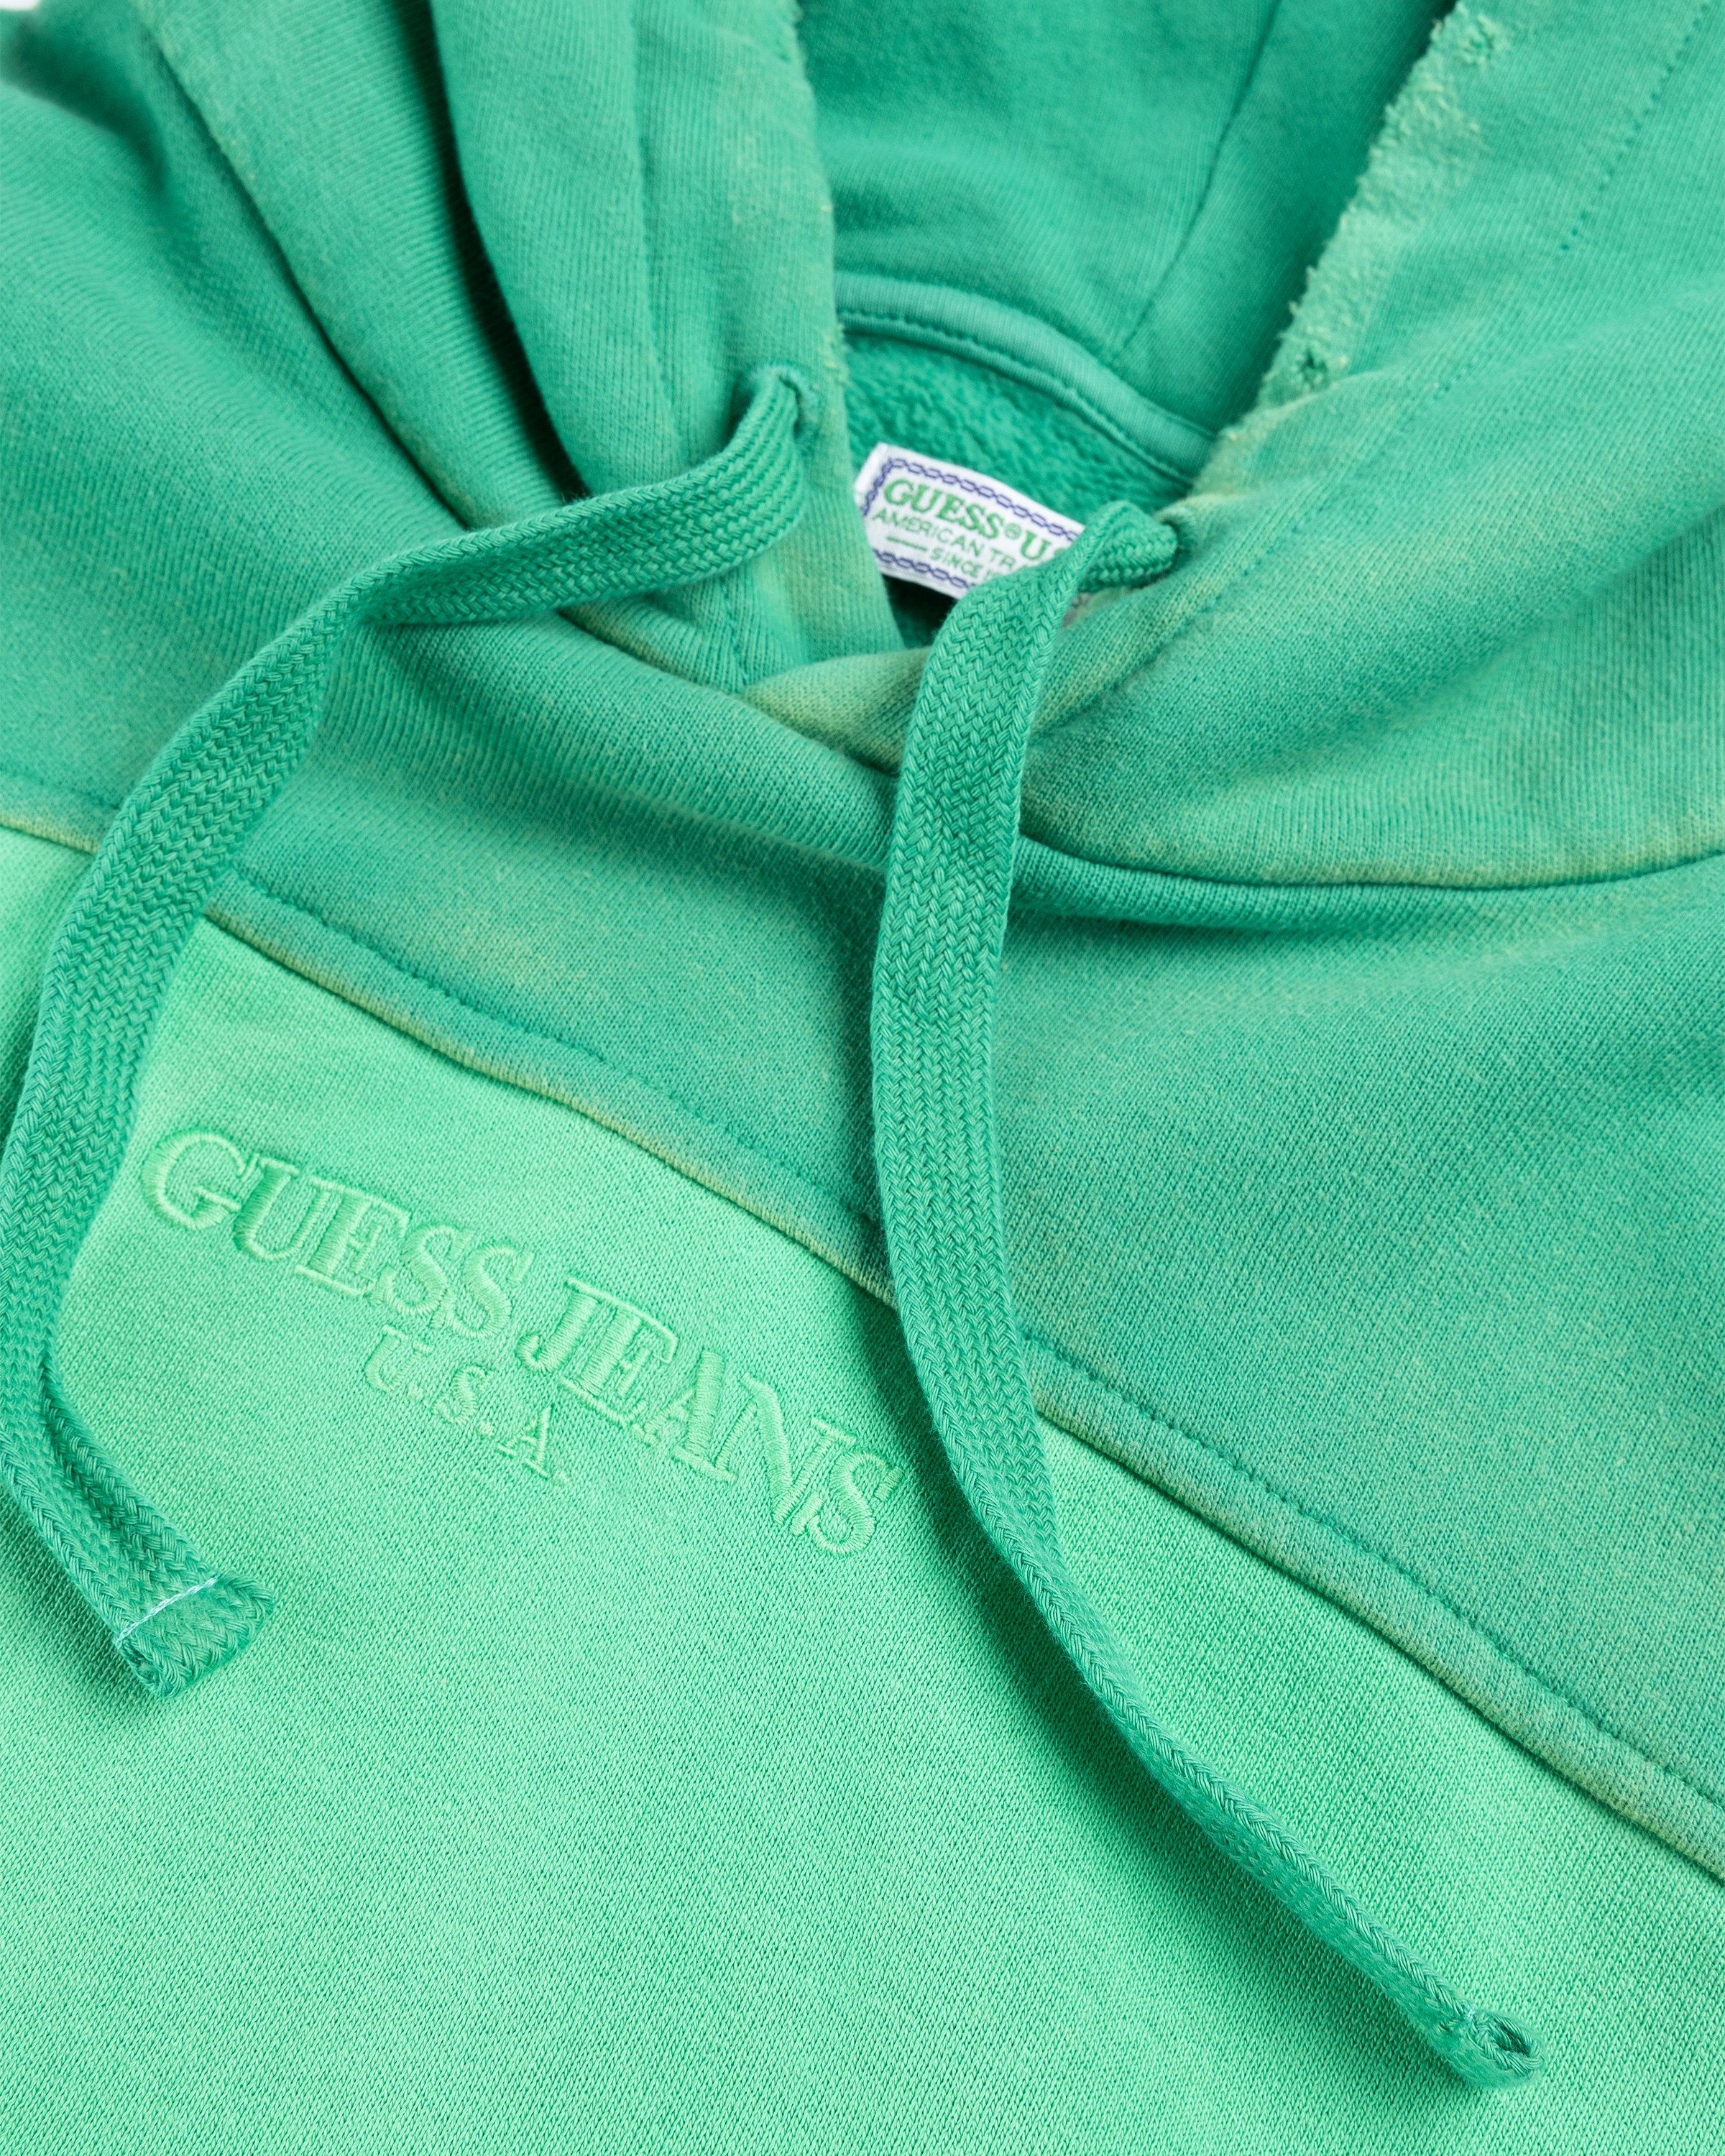 Guess USA - Two-Tone Hoodie Honeydew - Clothing - Green - Image 5